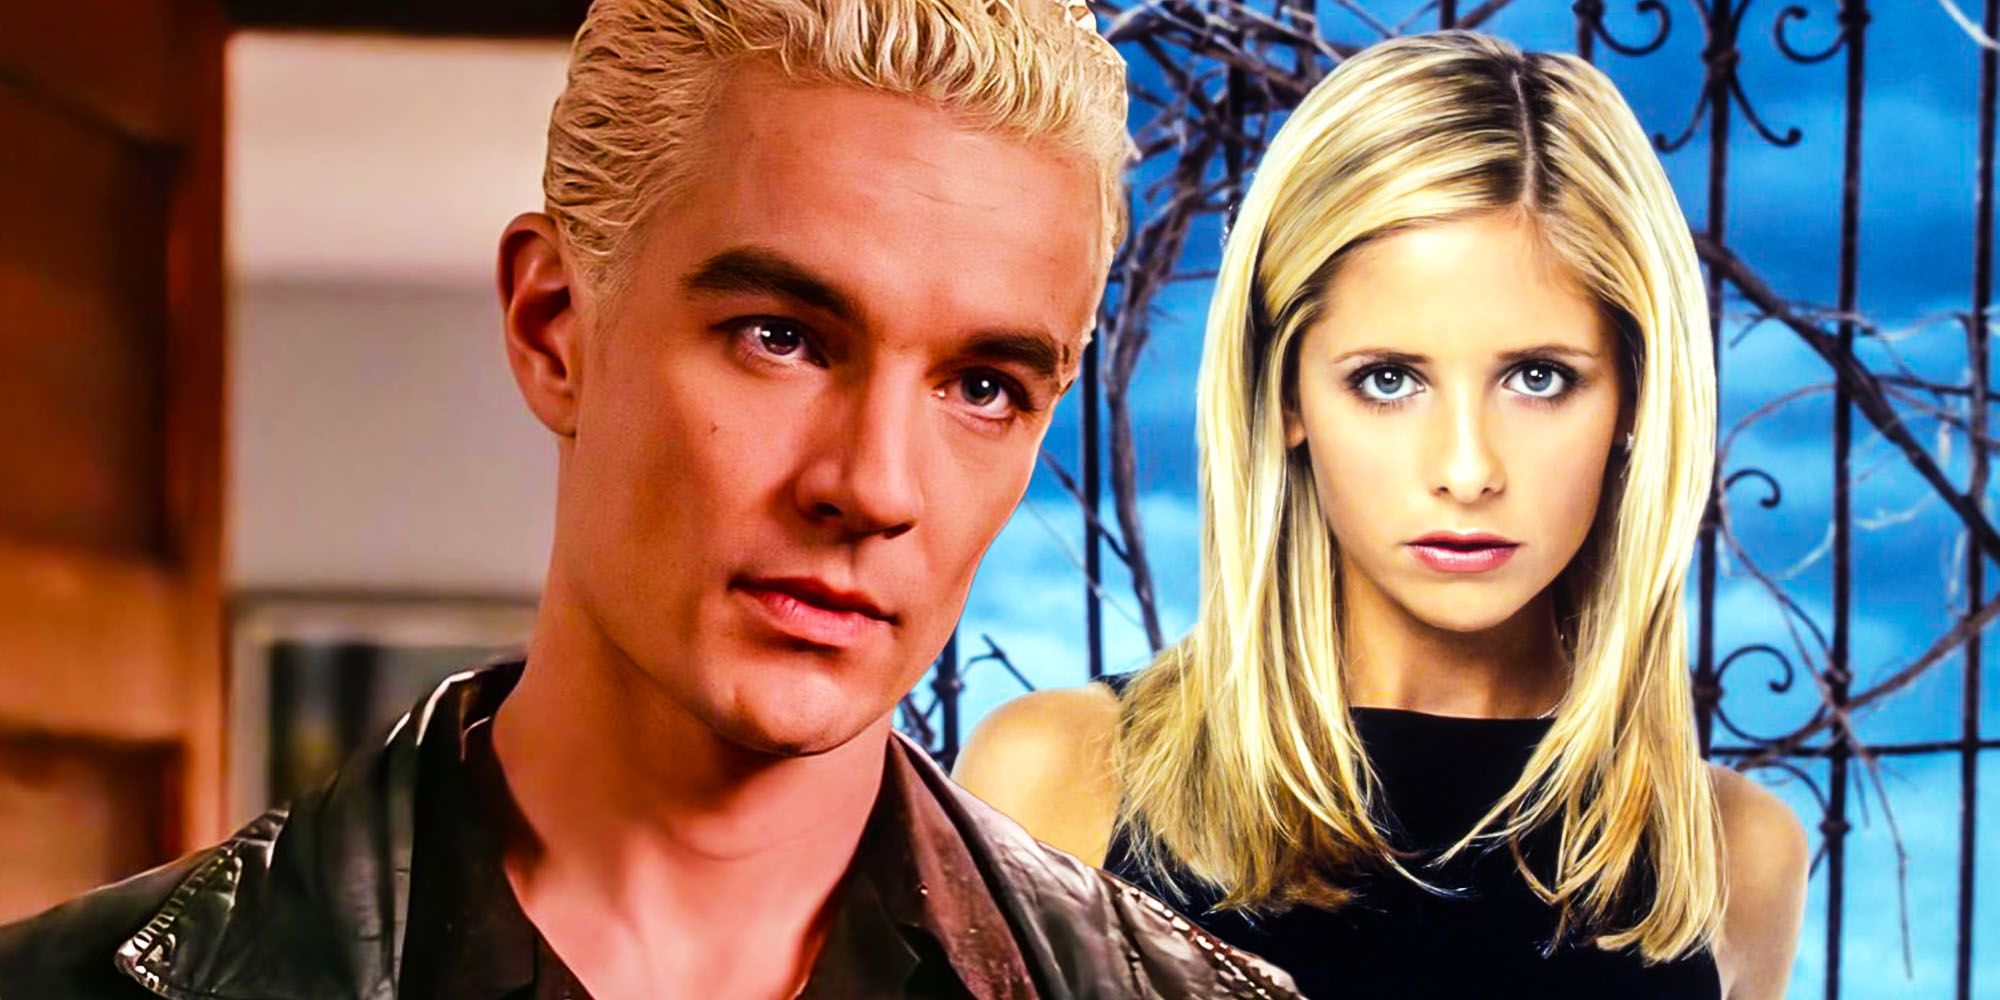 Buffy the vampire slayer Spike debut set up hero turn and romance with buffy